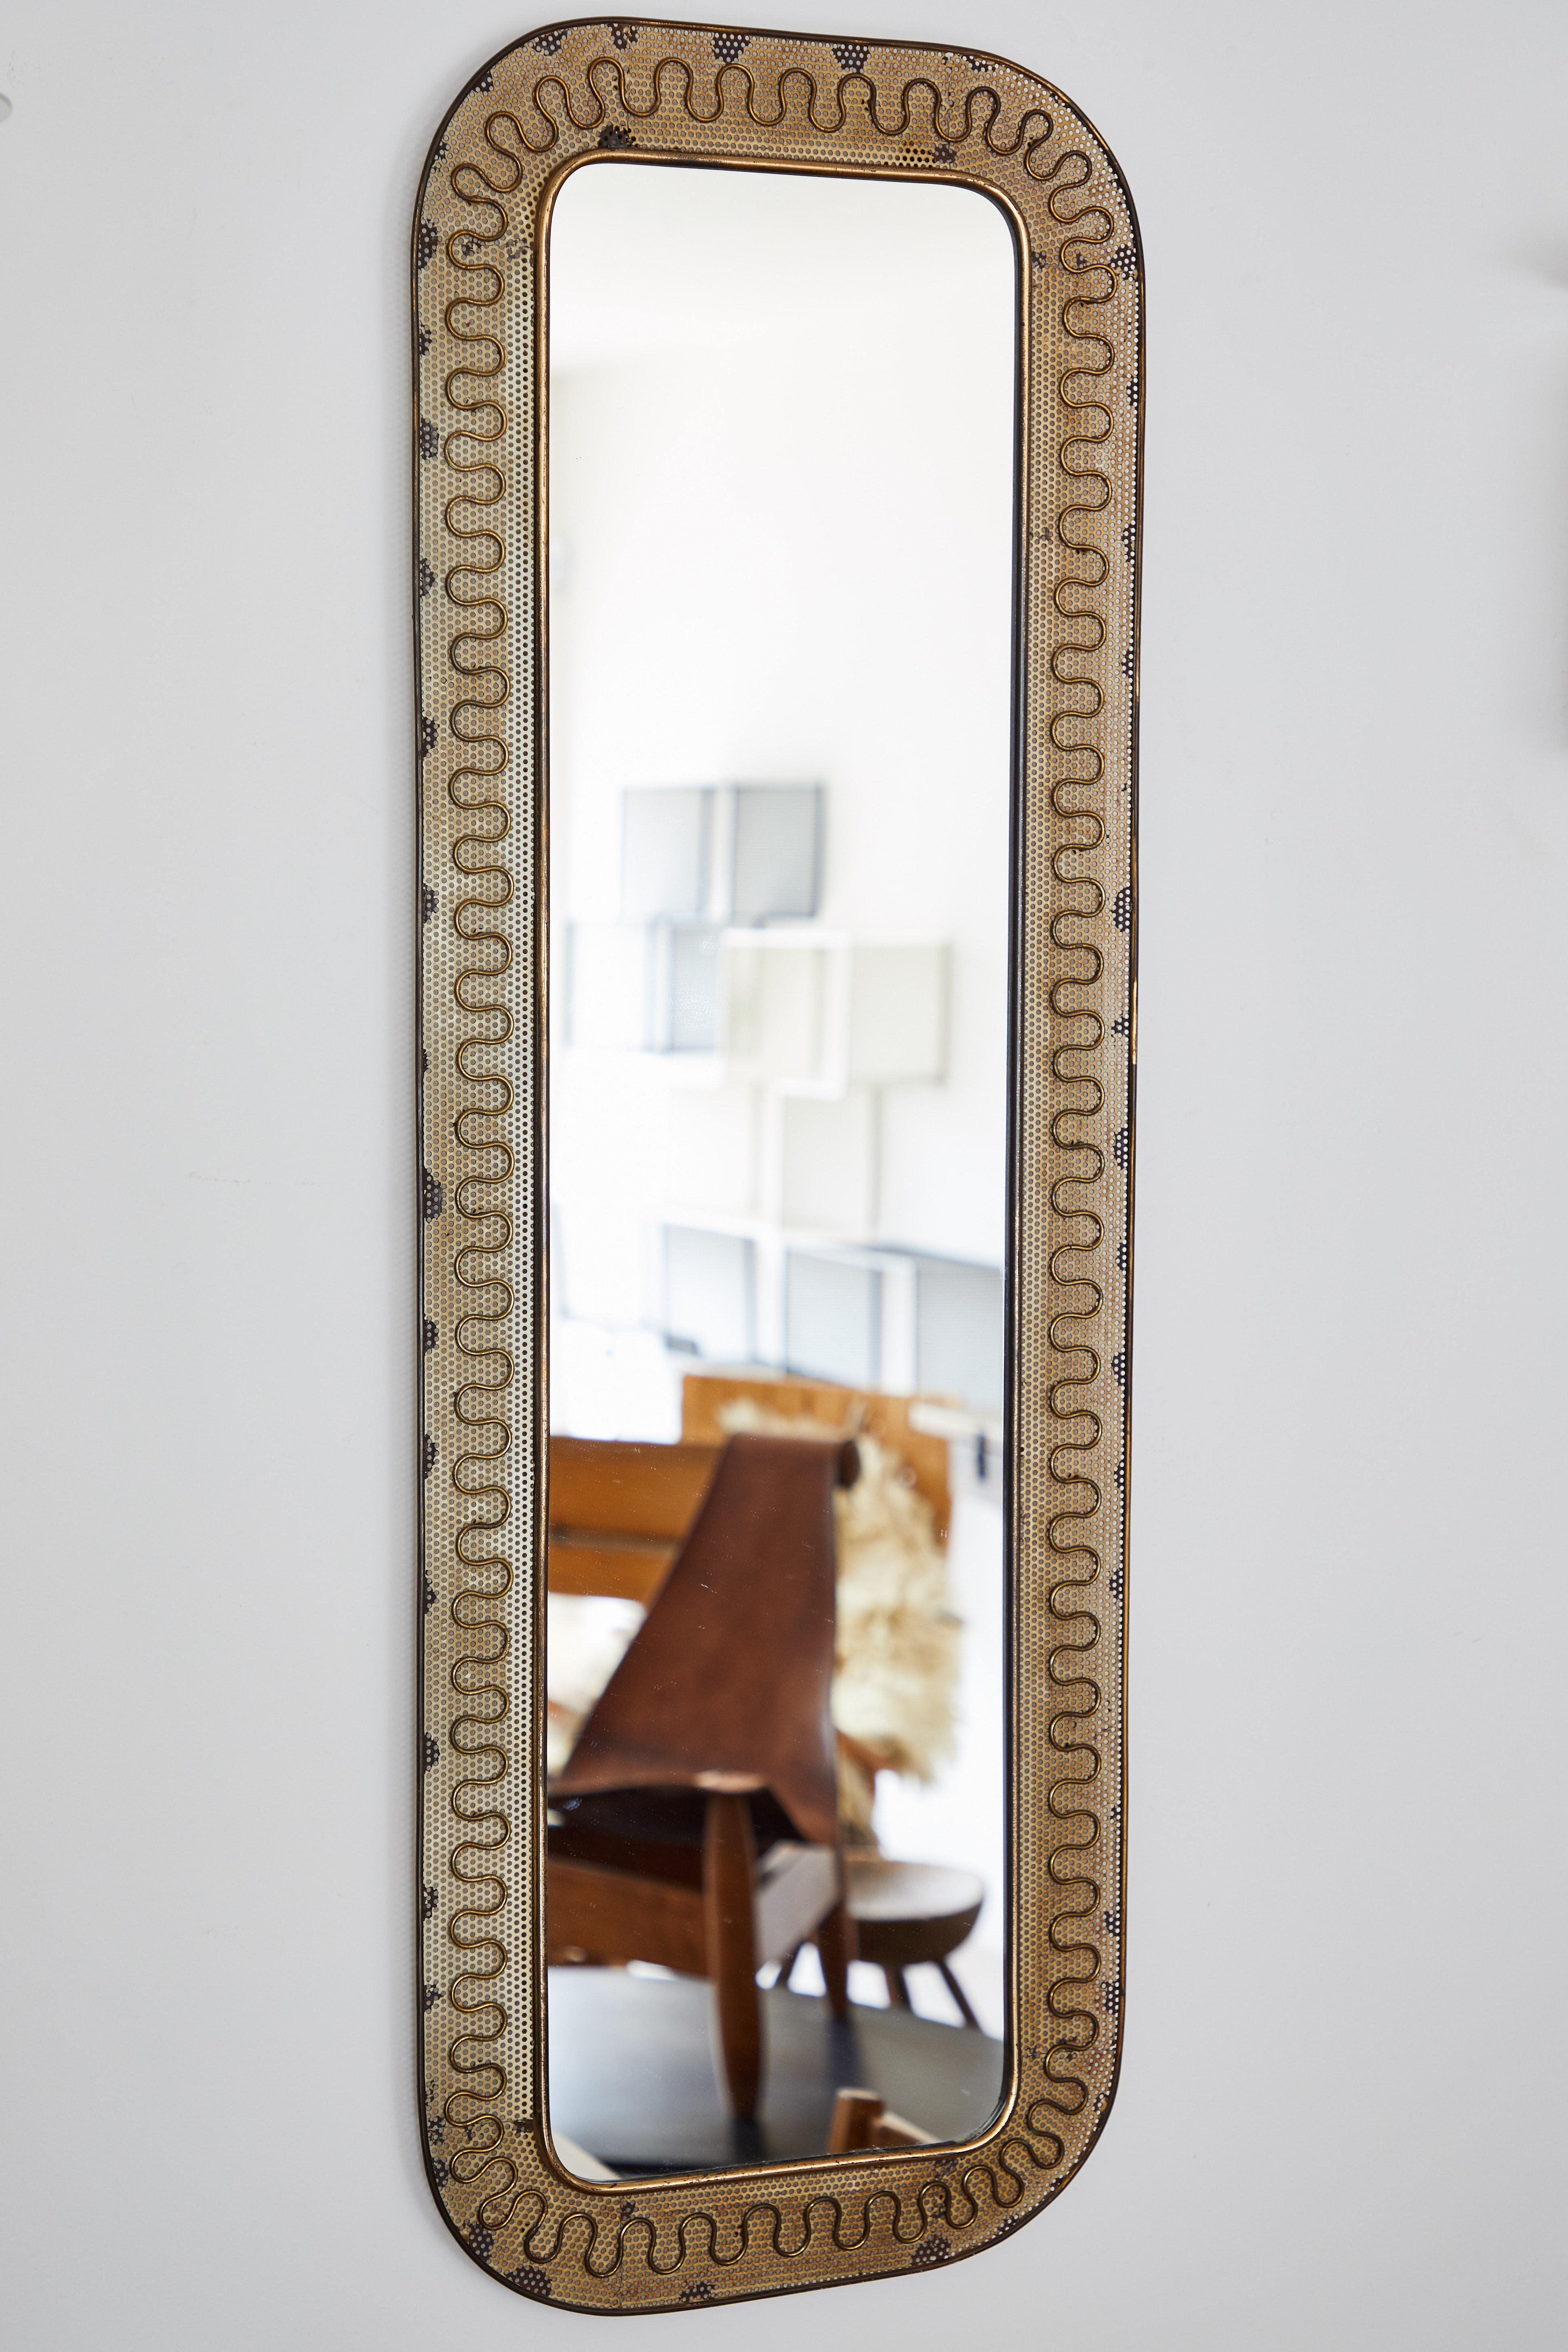 Italian brass and perforated metal mirror by Carlo Erba. Made in Italy, circa 1950s.